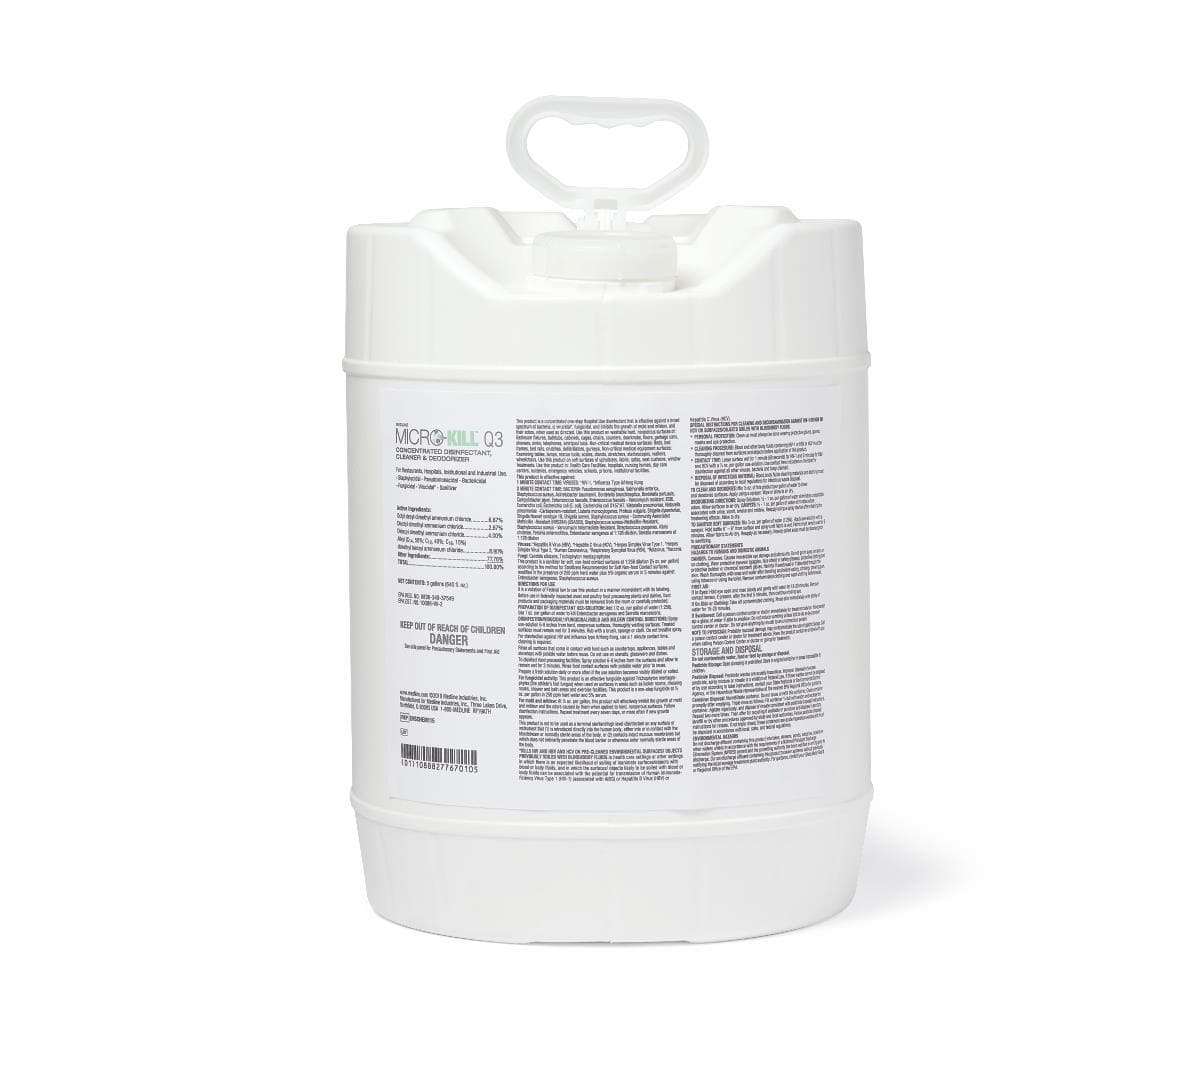 Medline Micro-Kill Q3 Concentrated Disinfectant, Cleaner & Deodorizer - 5 Gallon Bucket - Senior.com Disinfectants